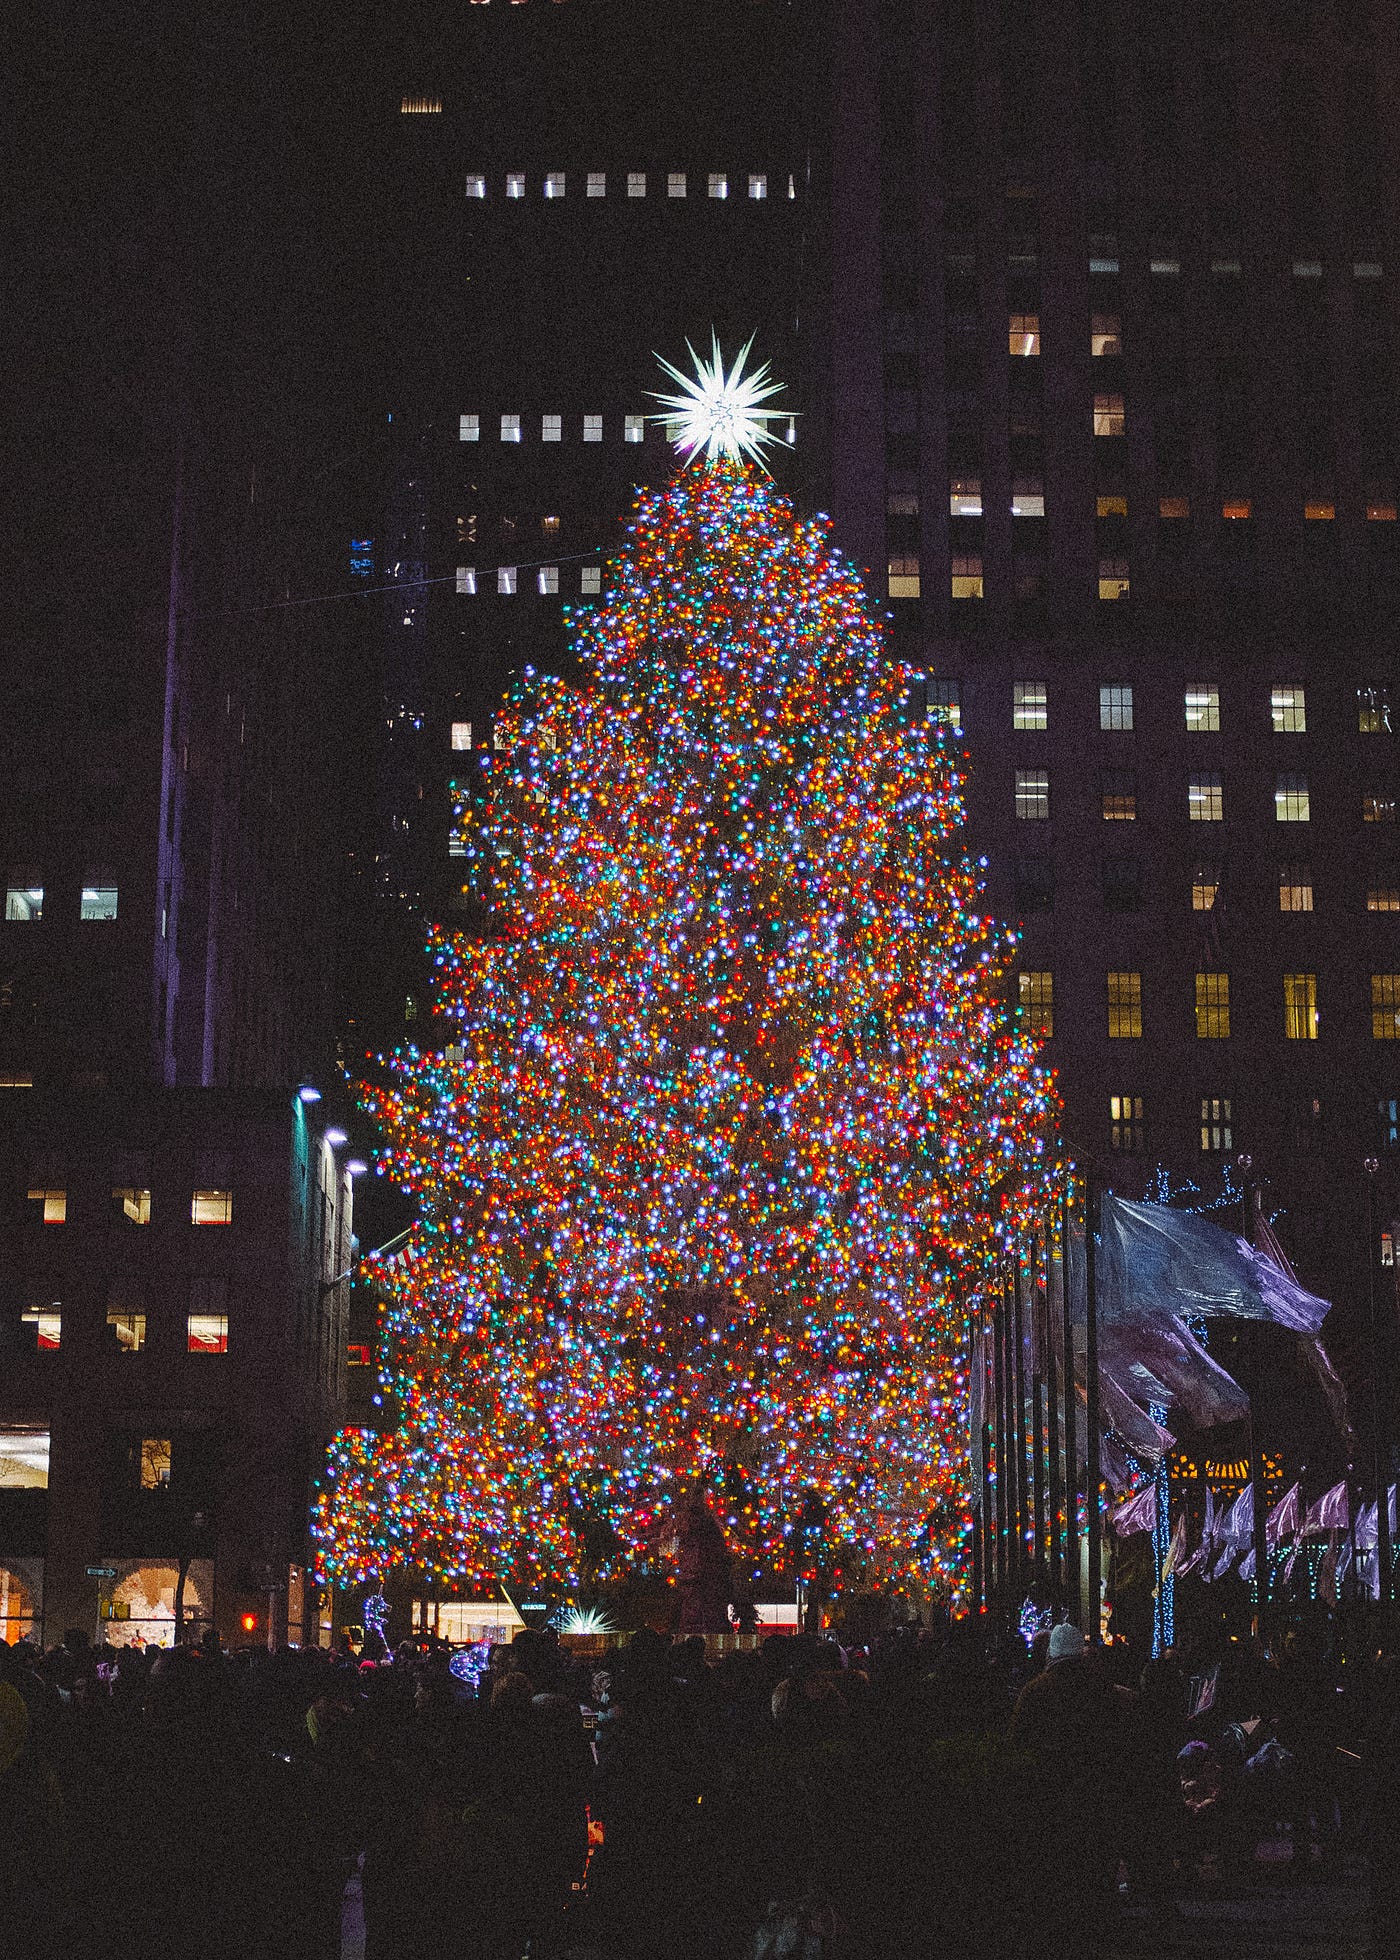 Mapping the Rockefeller Center tree with ggplot2 in R | by Matt Russell |  Towards Data Science